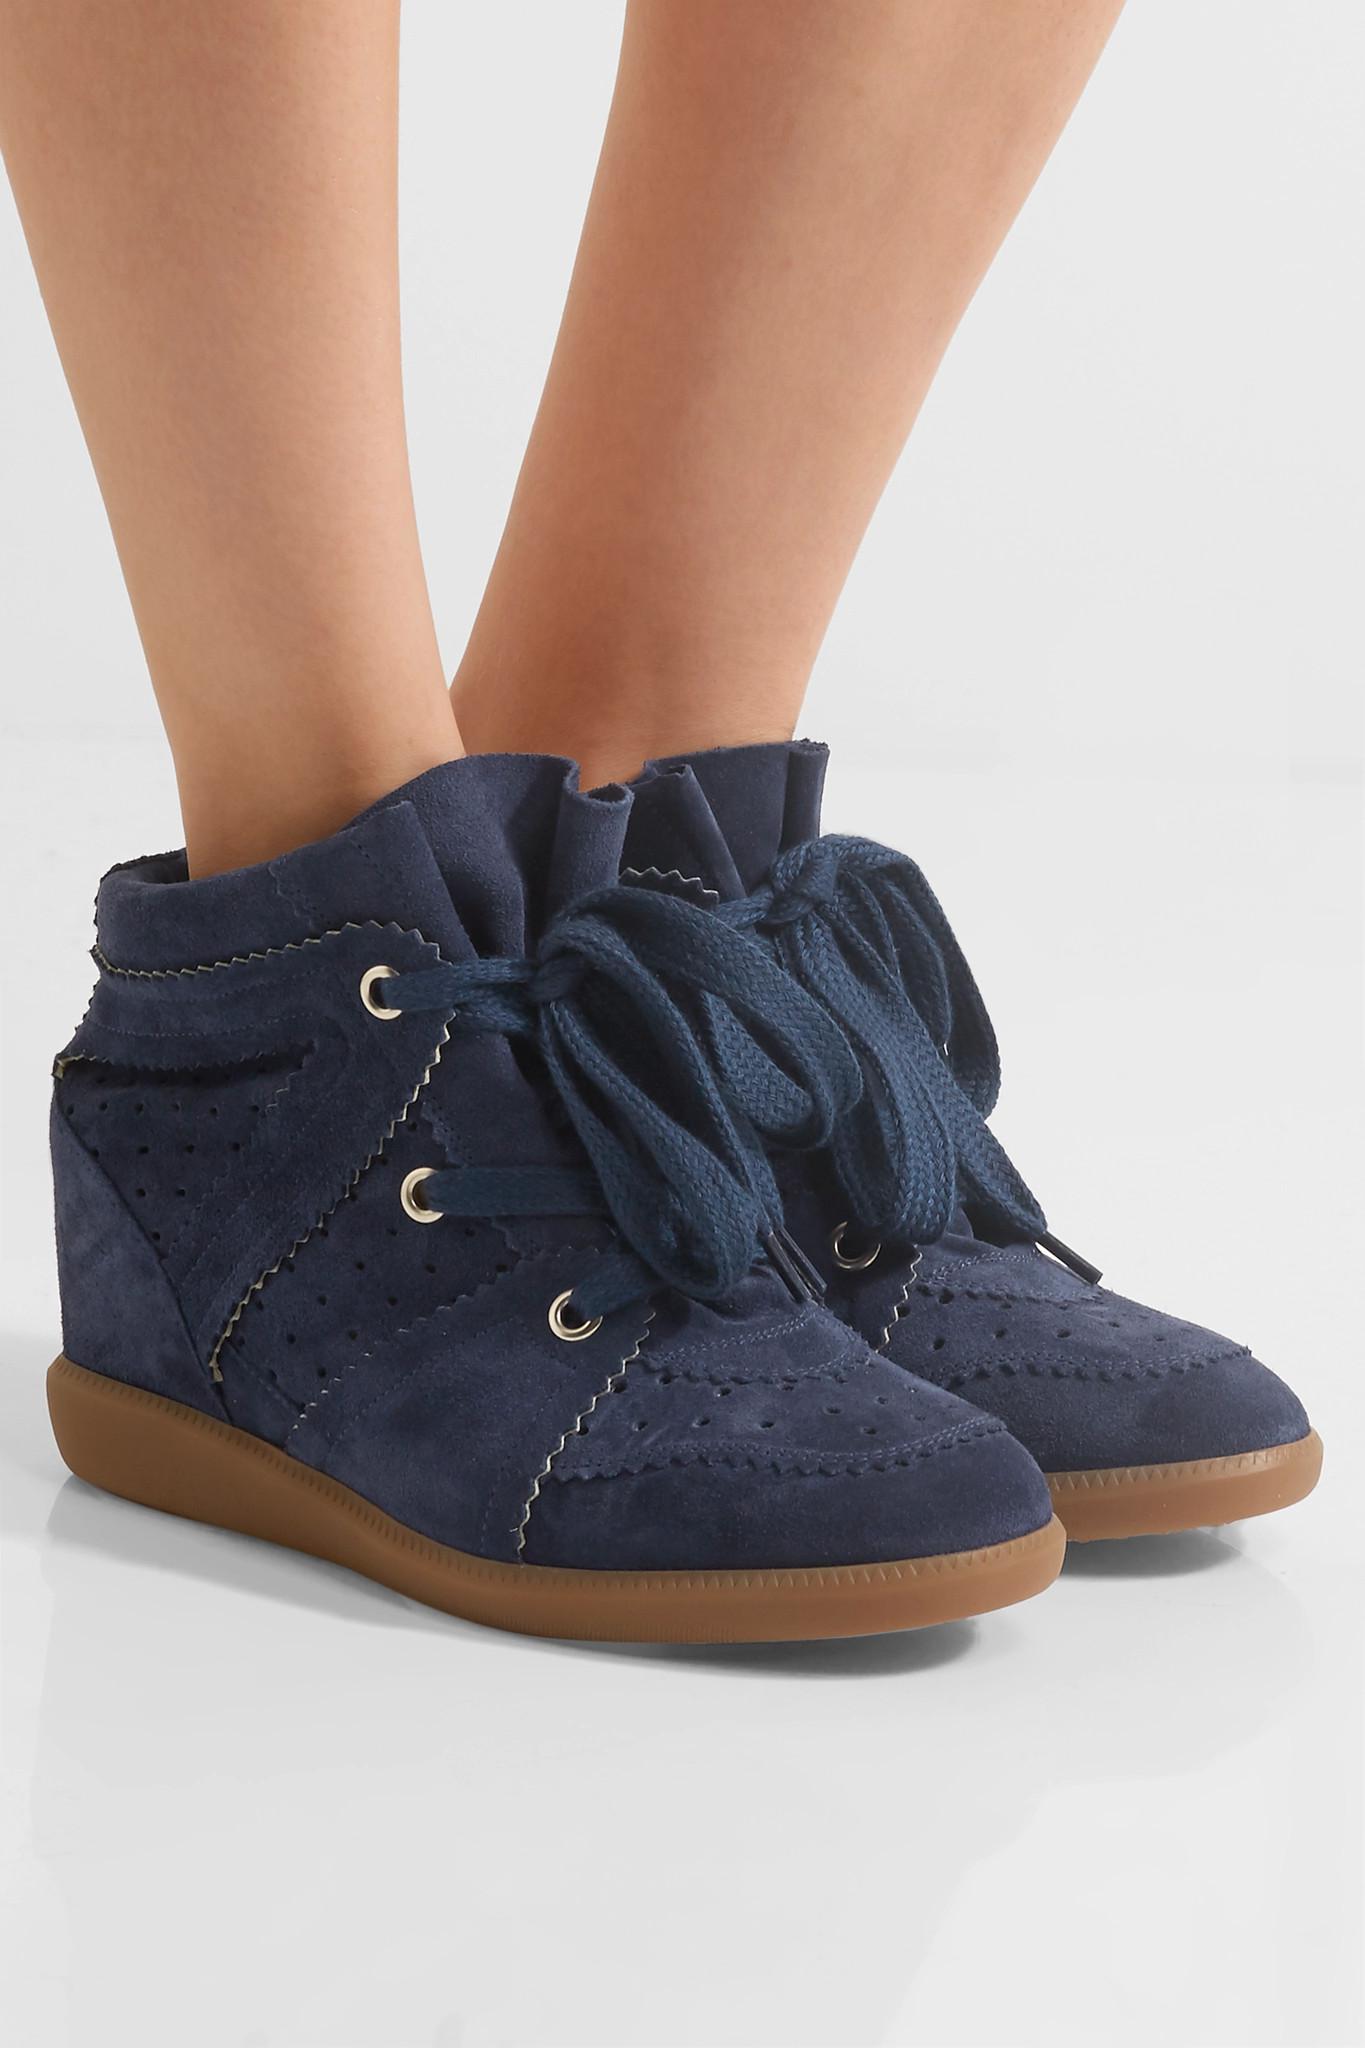 Isabel Marant Étoile Bobby Suede Wedge Sneakers in Blue - Lyst